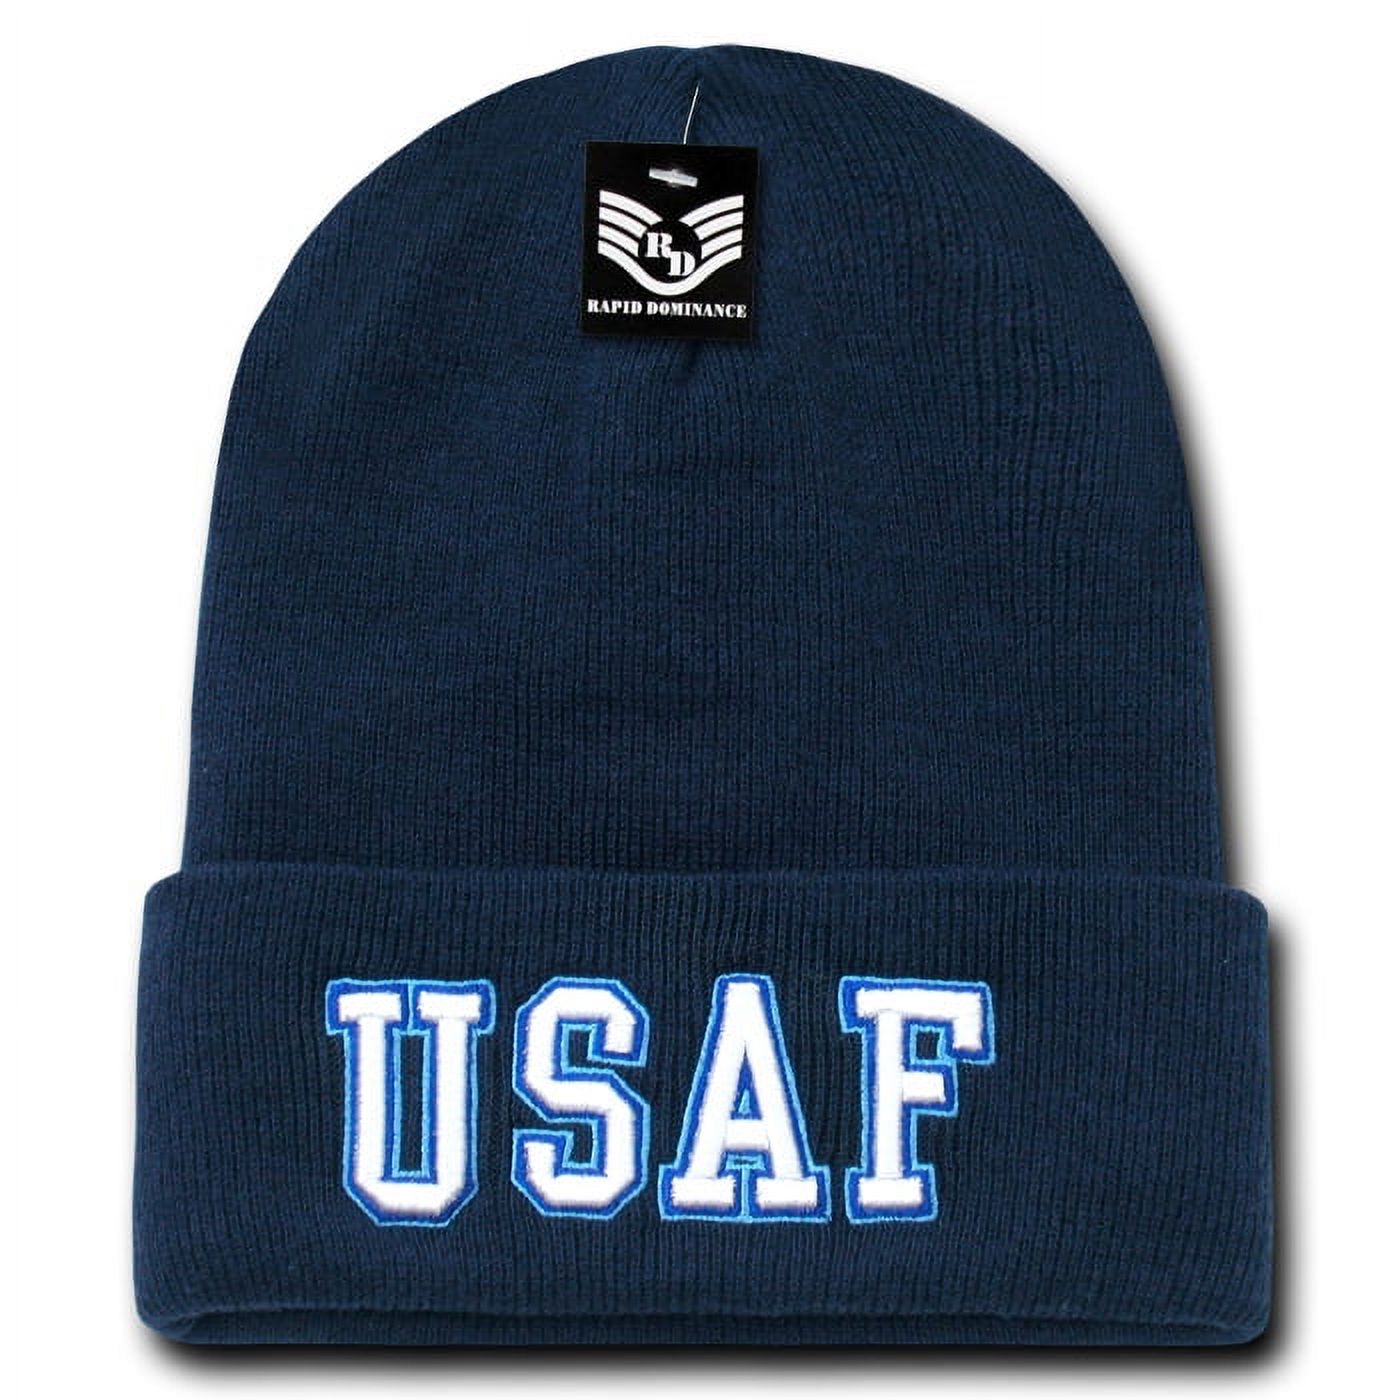 Rapid Dominance Air Force Emblem Military Long Cuff Mens Beanie Cap [Navy Blue] - image 2 of 7